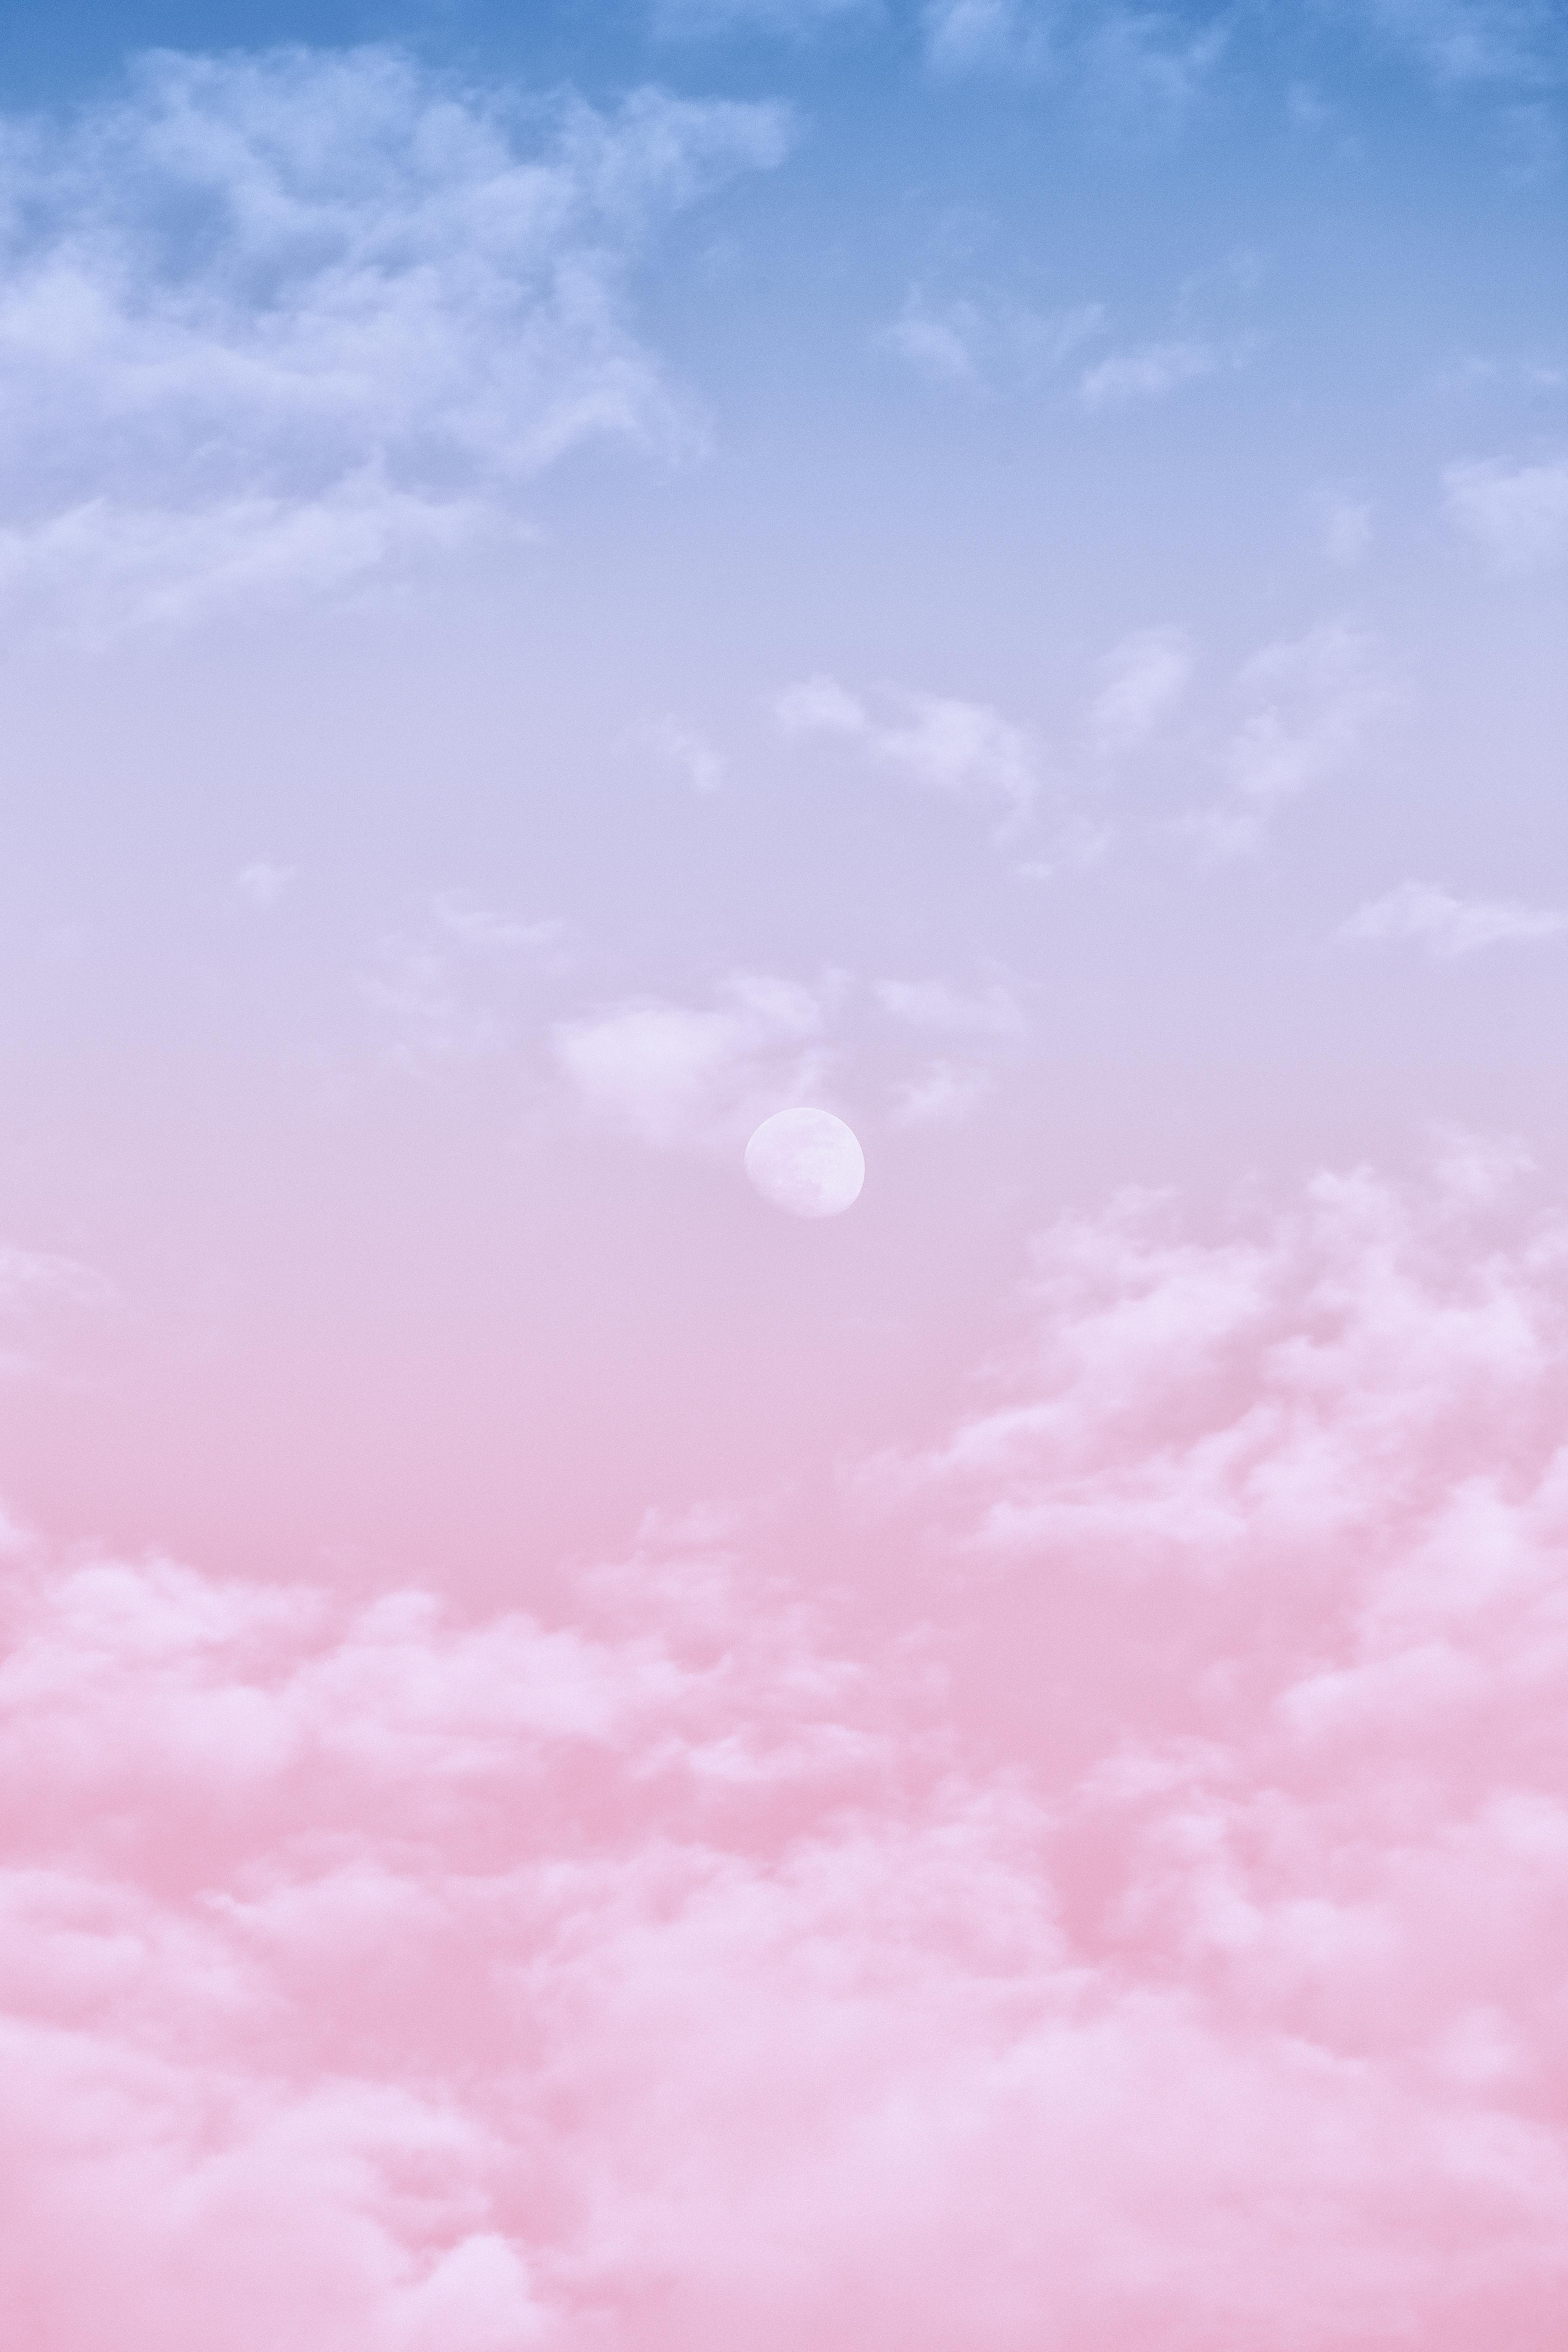 white clouds in pink and blue clouds